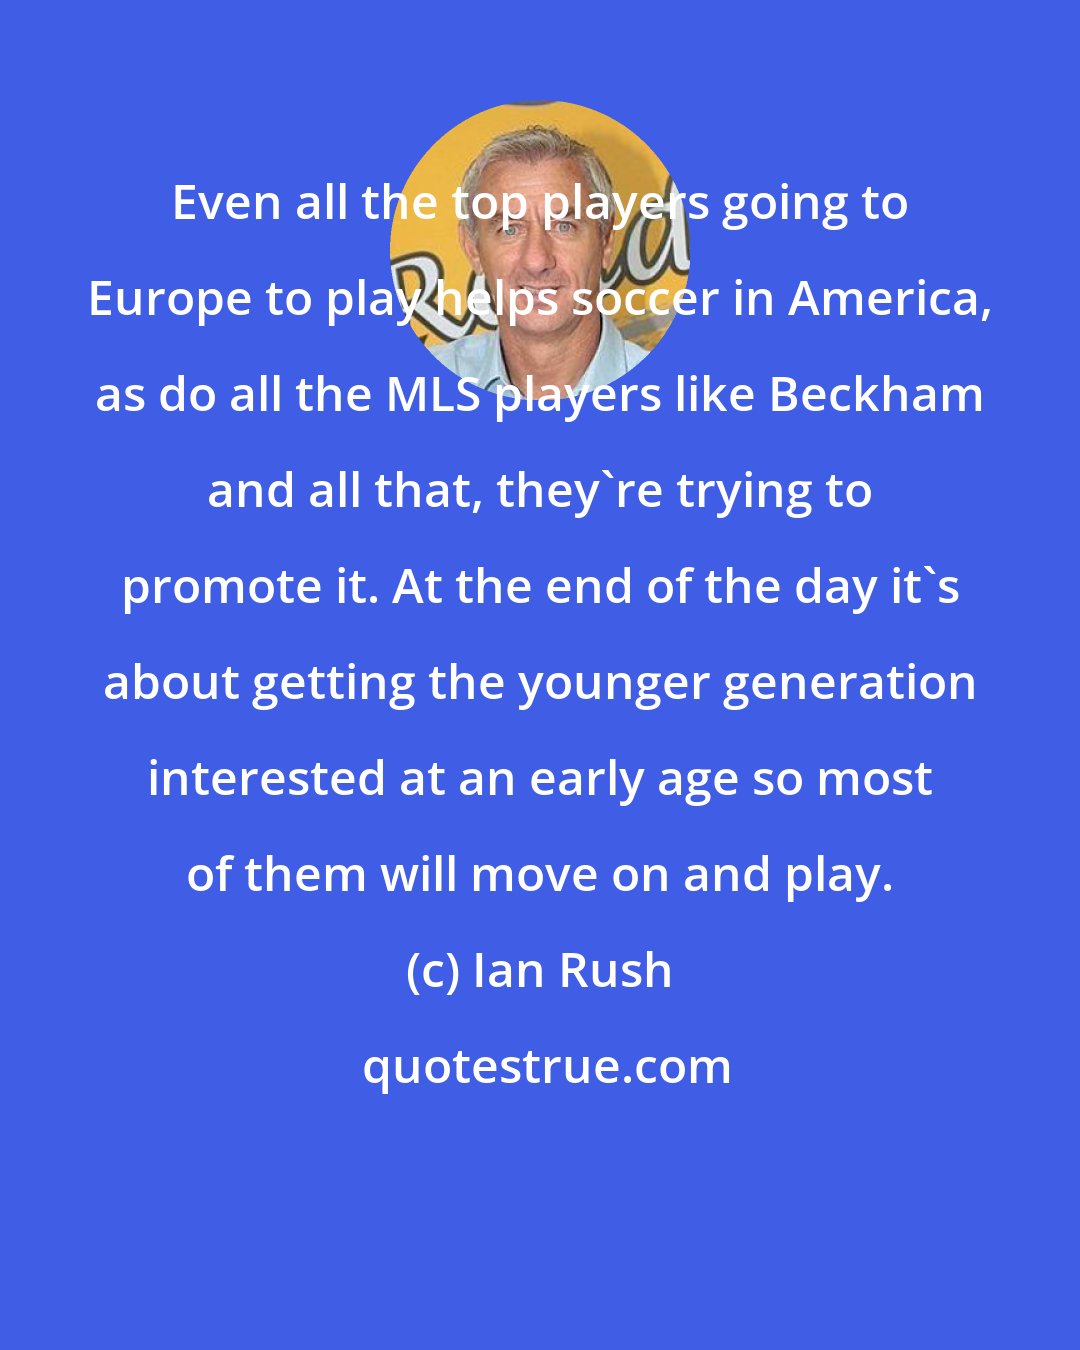 Ian Rush: Even all the top players going to Europe to play helps soccer in America, as do all the MLS players like Beckham and all that, they're trying to promote it. At the end of the day it's about getting the younger generation interested at an early age so most of them will move on and play.